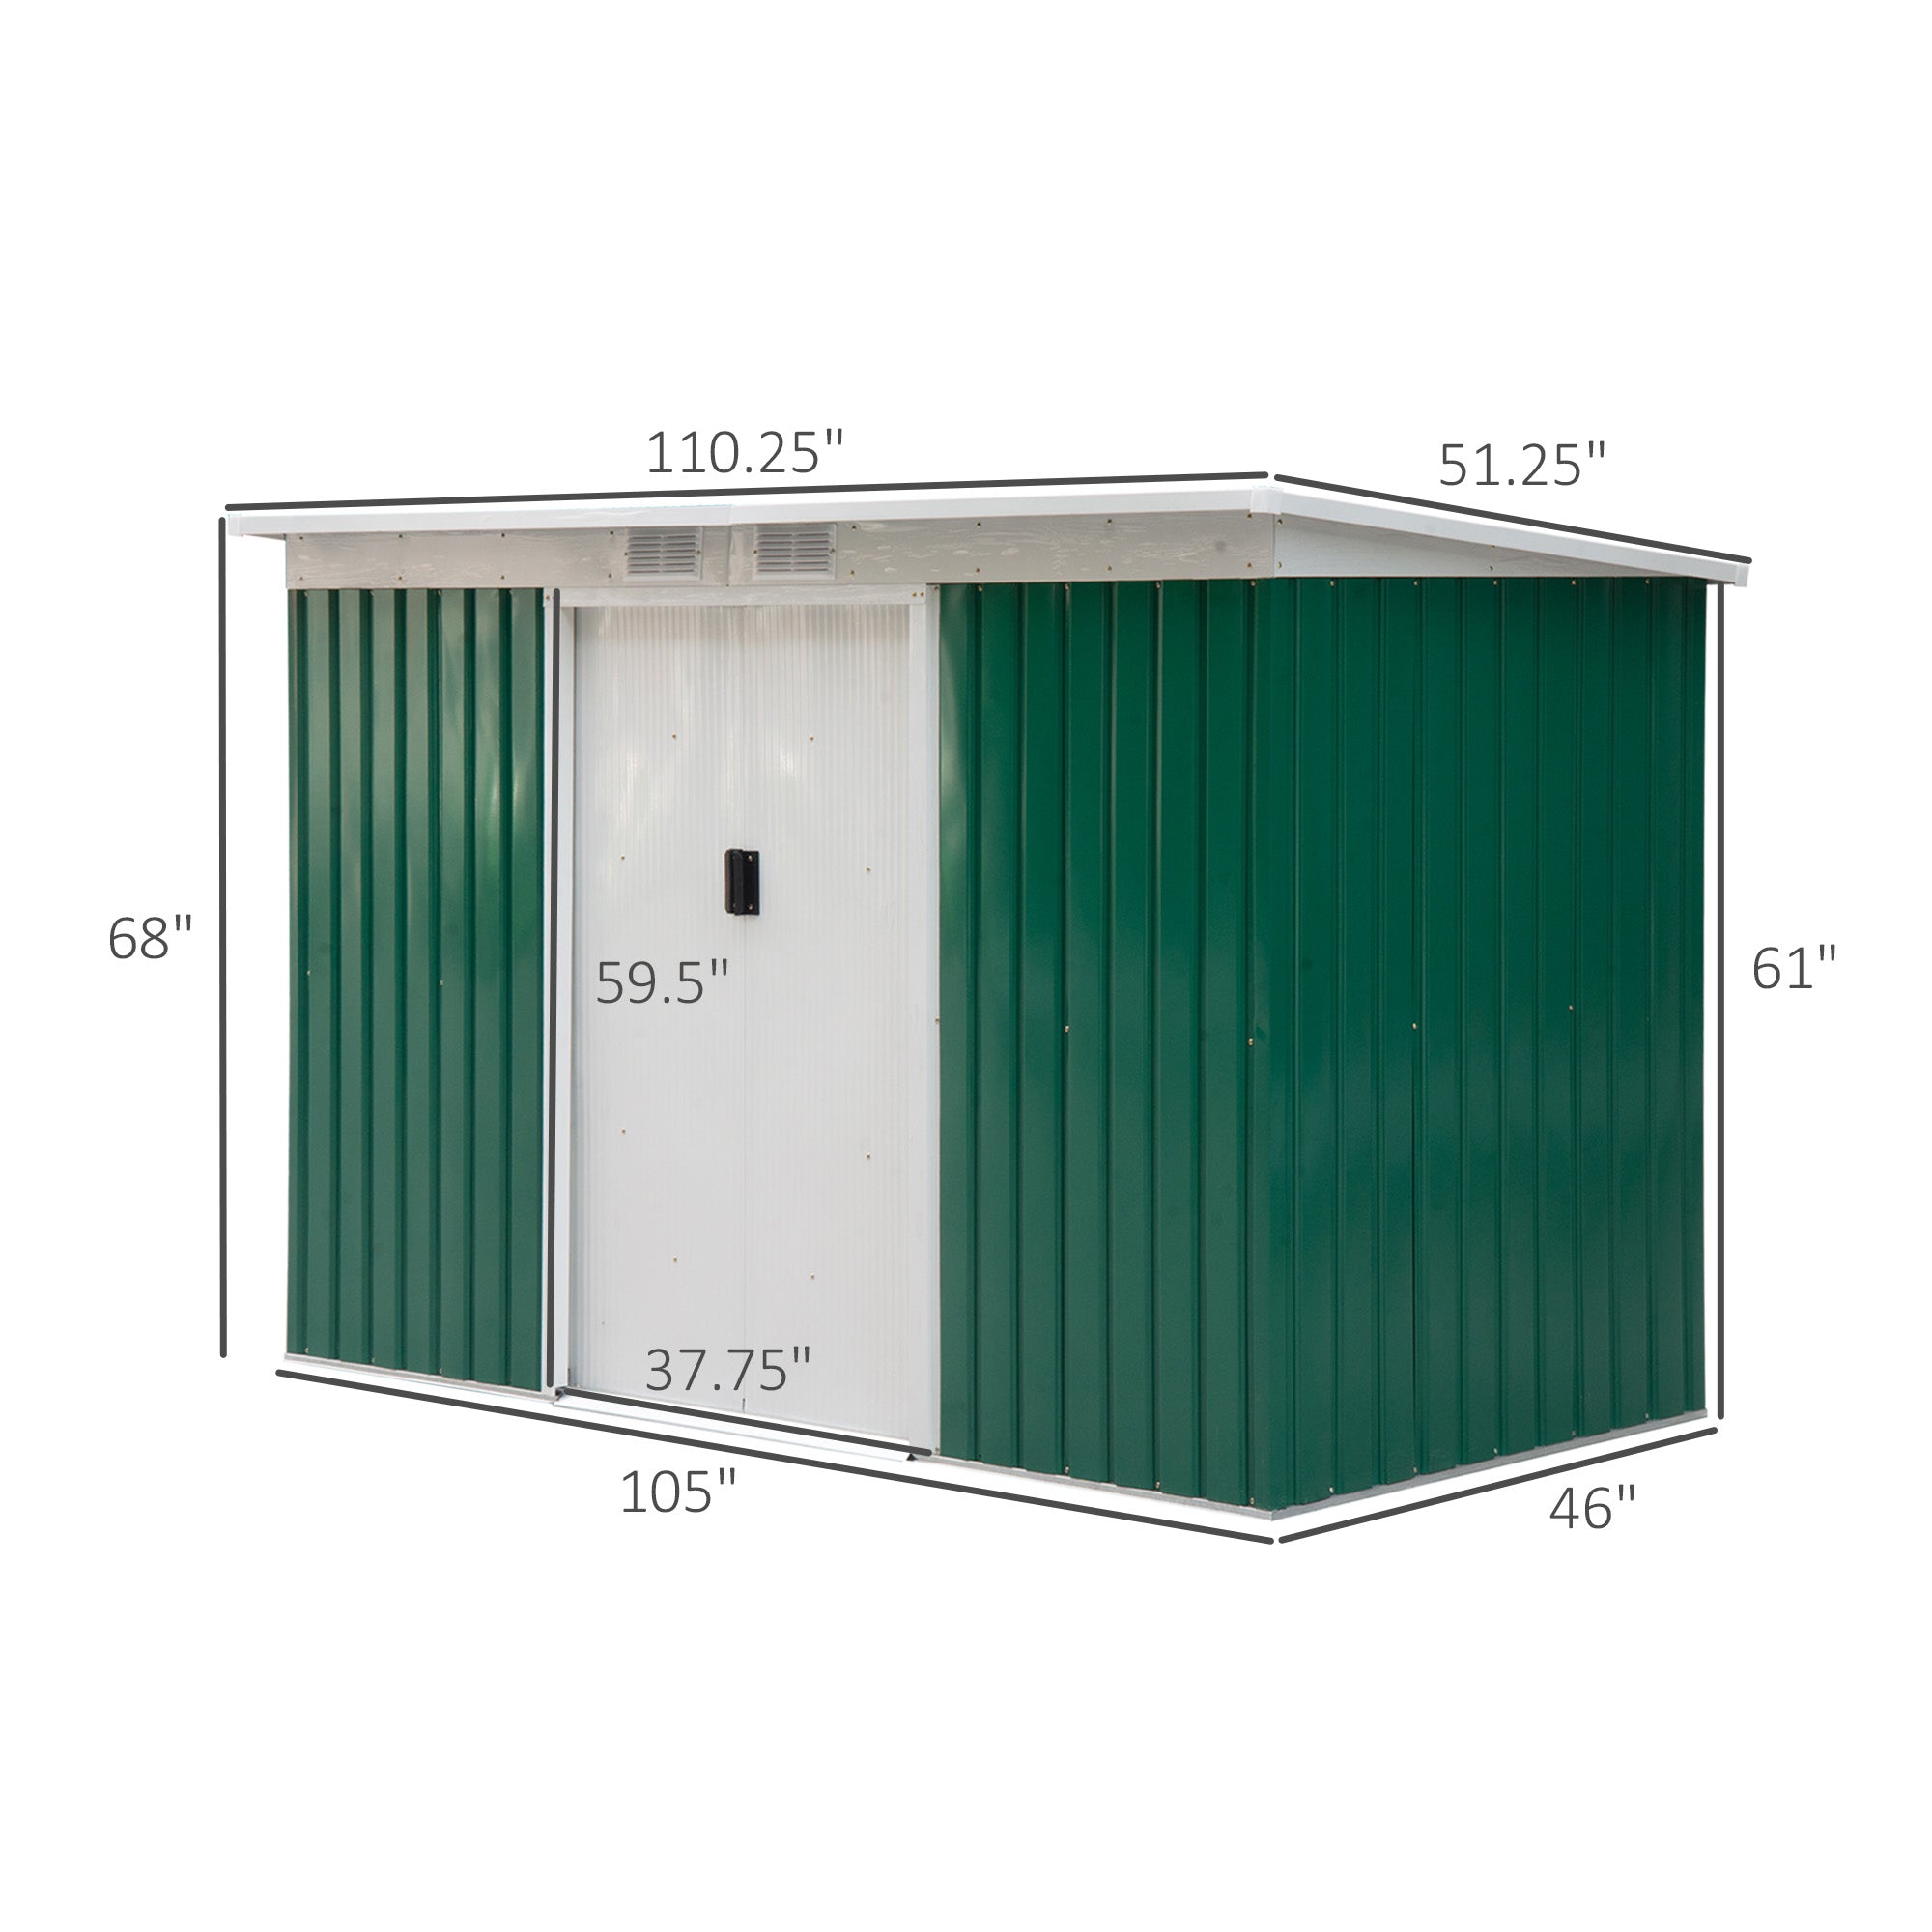 9’ x 4’ Outdoor Rust Resistant Metal Garden Vented Storage Shed Metal Tool Storage House - Green/White